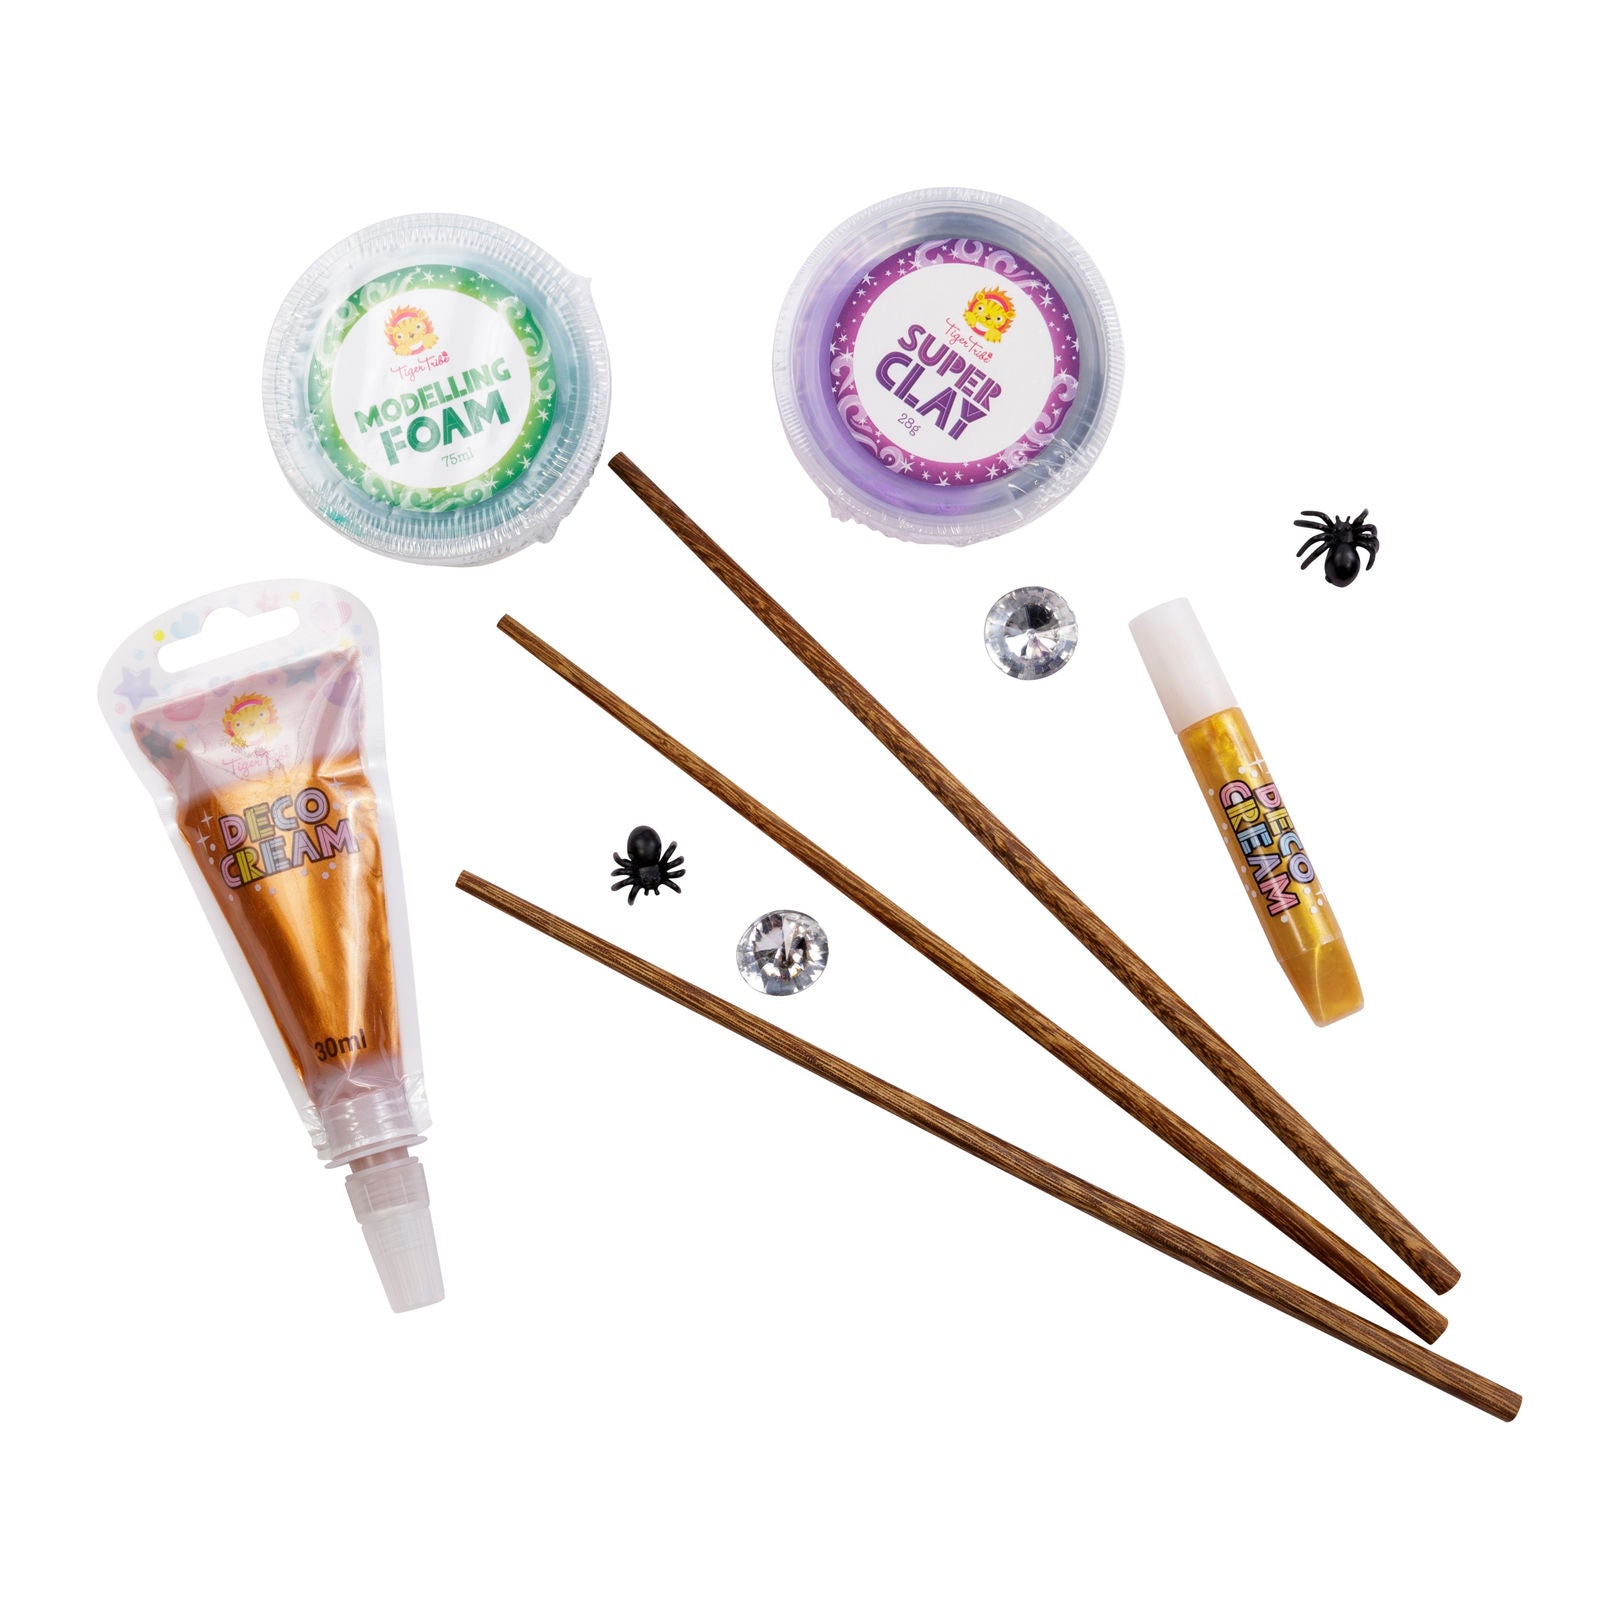 Tiger Tribe Magic Wand Kit – Spellbound